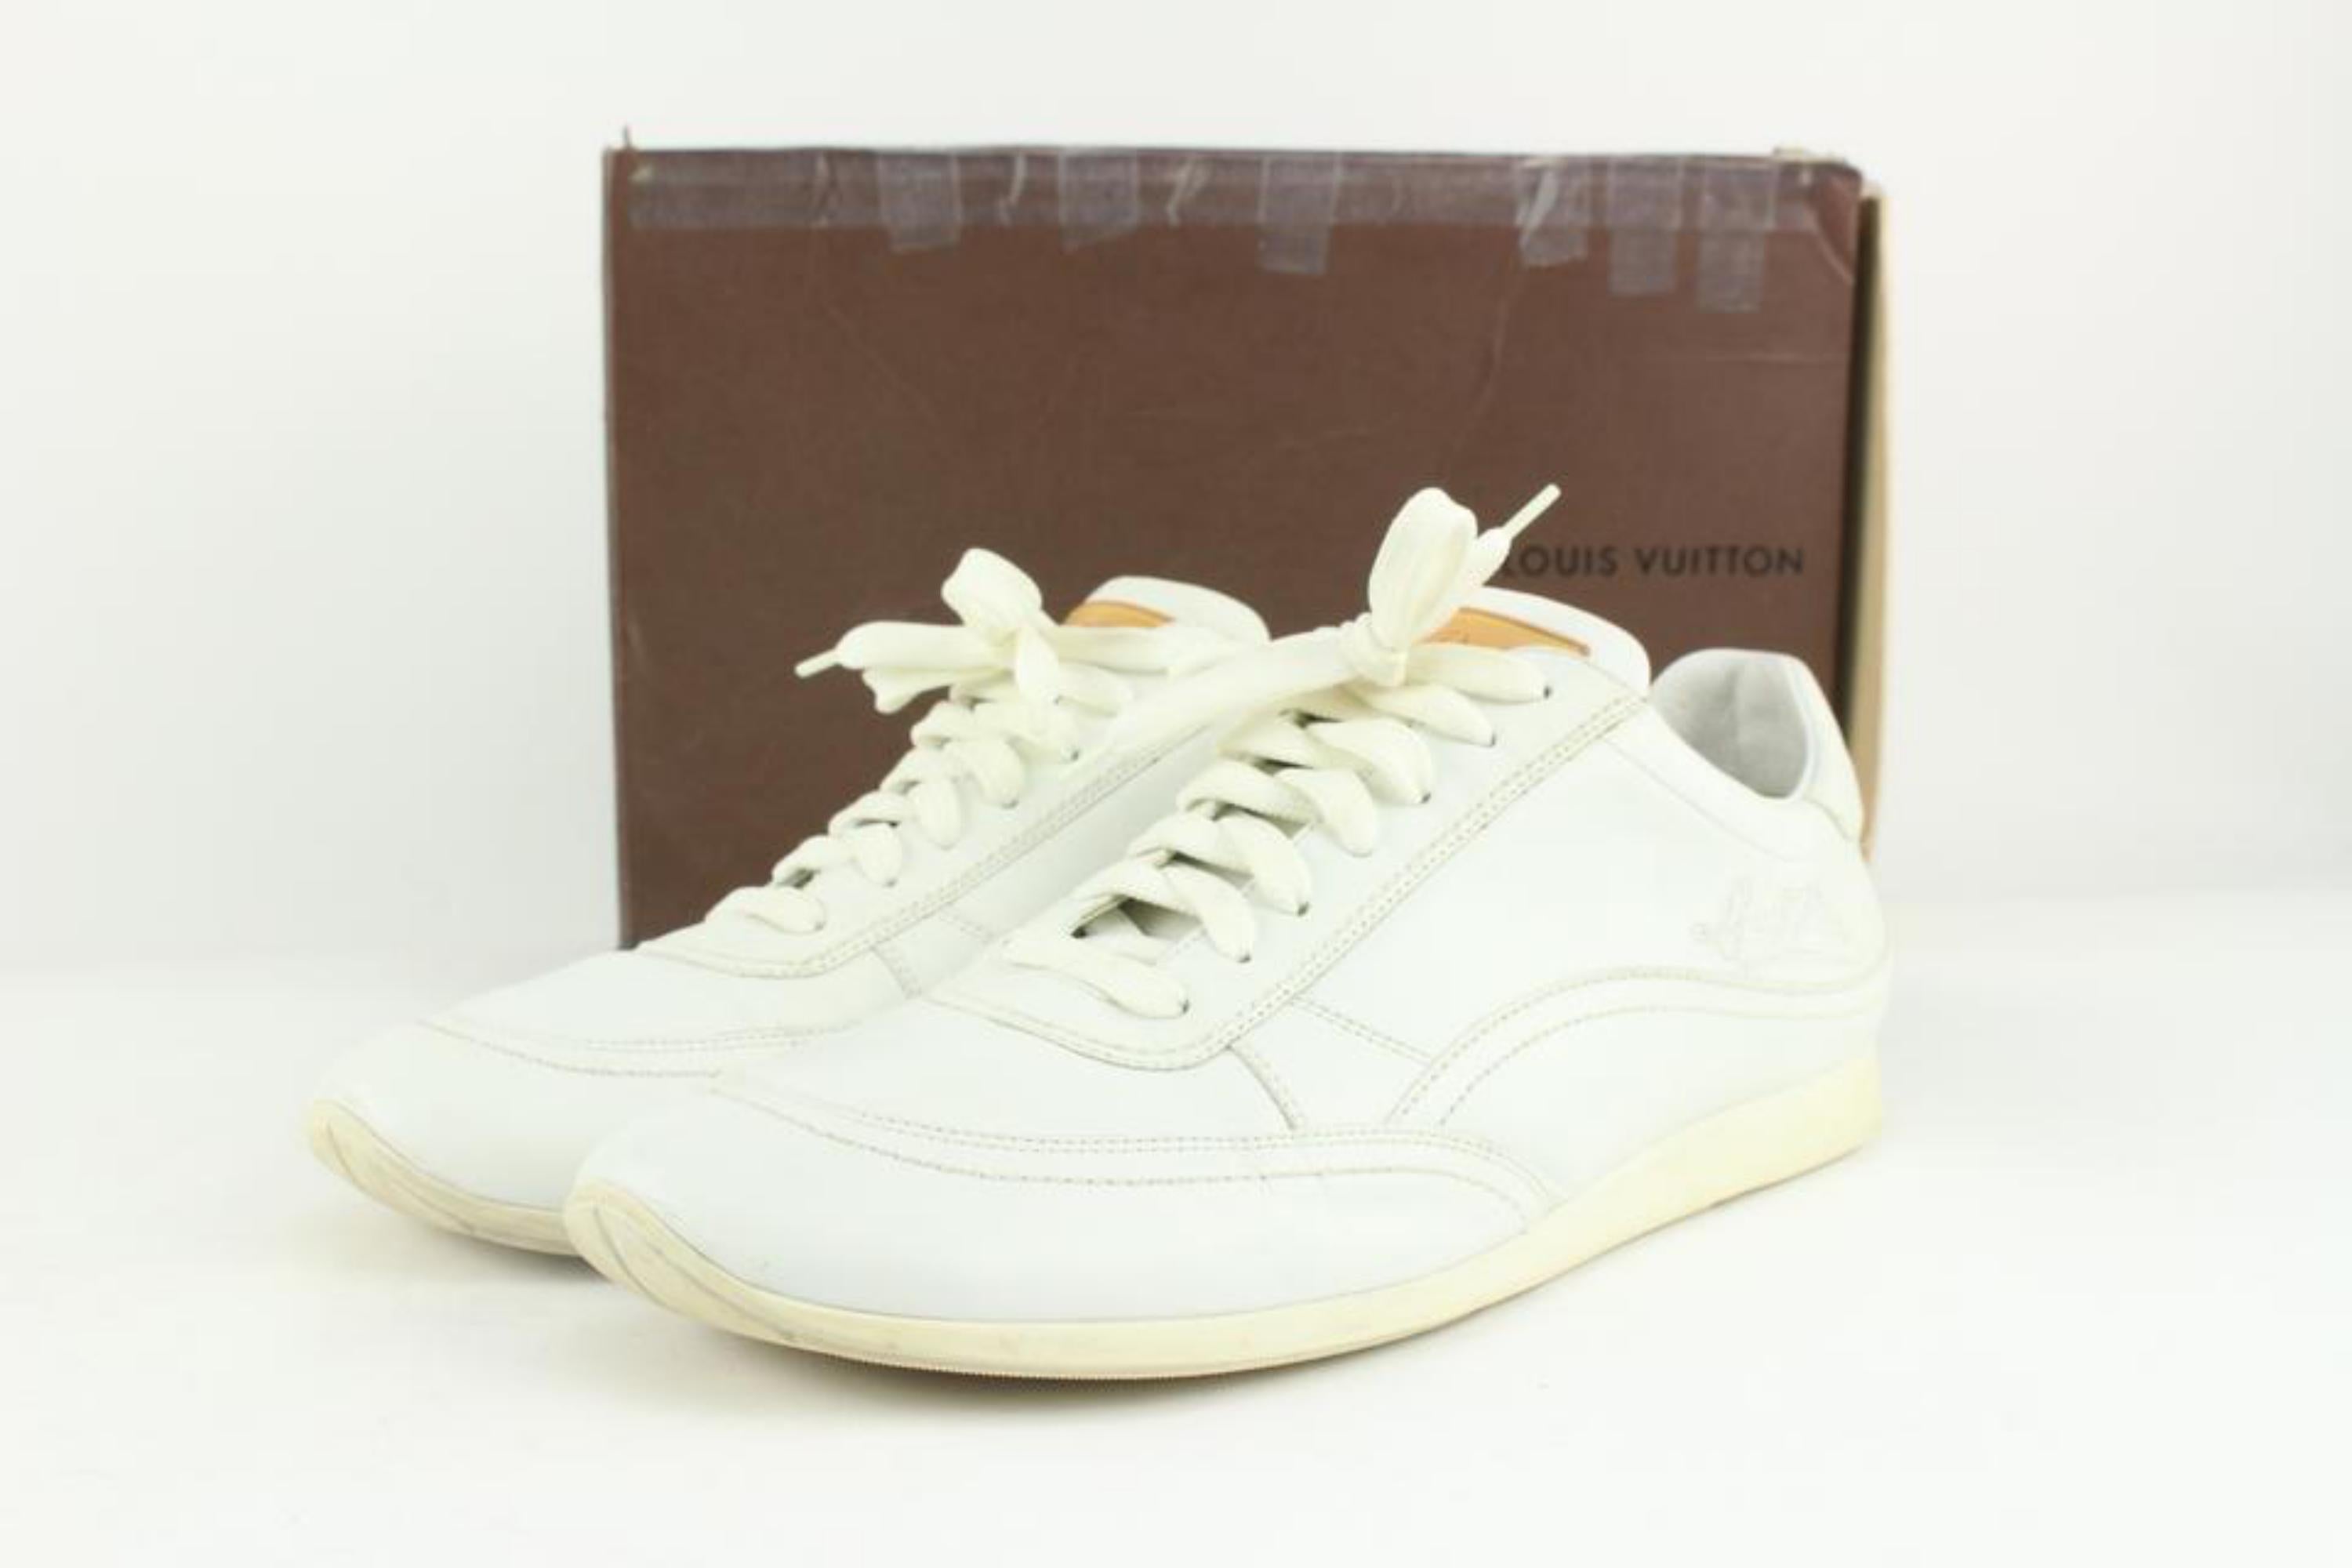 Louis Vuitton Rare Men's 10.5 US White Sneaker 5L1228
Date Code/Serial Number: G0 1026
Made In: Italy
Measurements: Length:  12